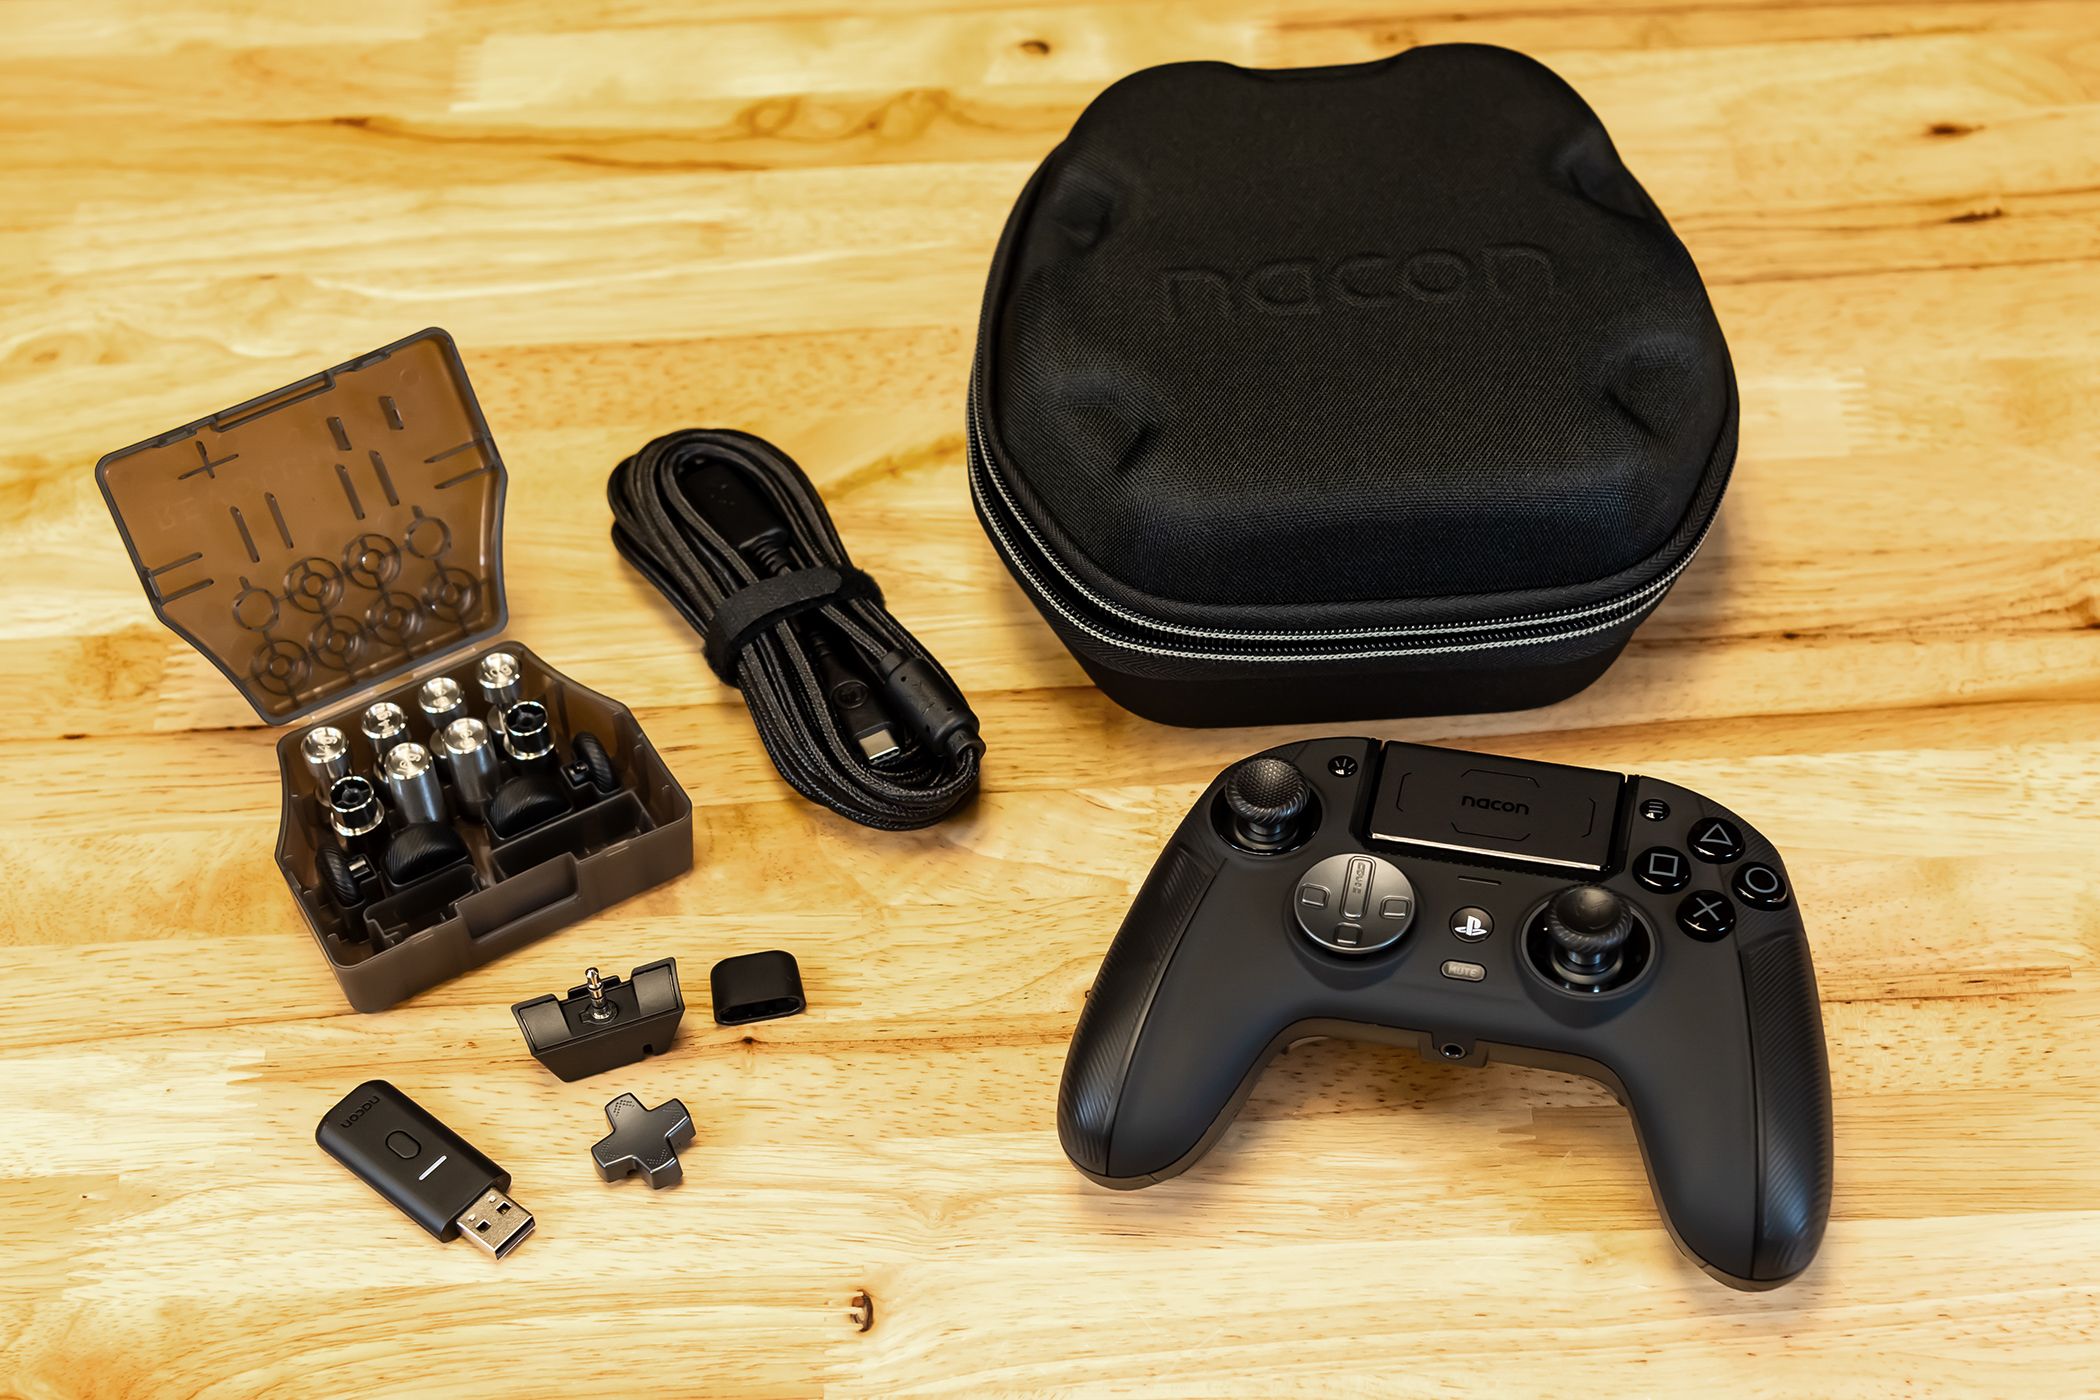 The Nacon Revolution Pro 5 Controller and its accessories.